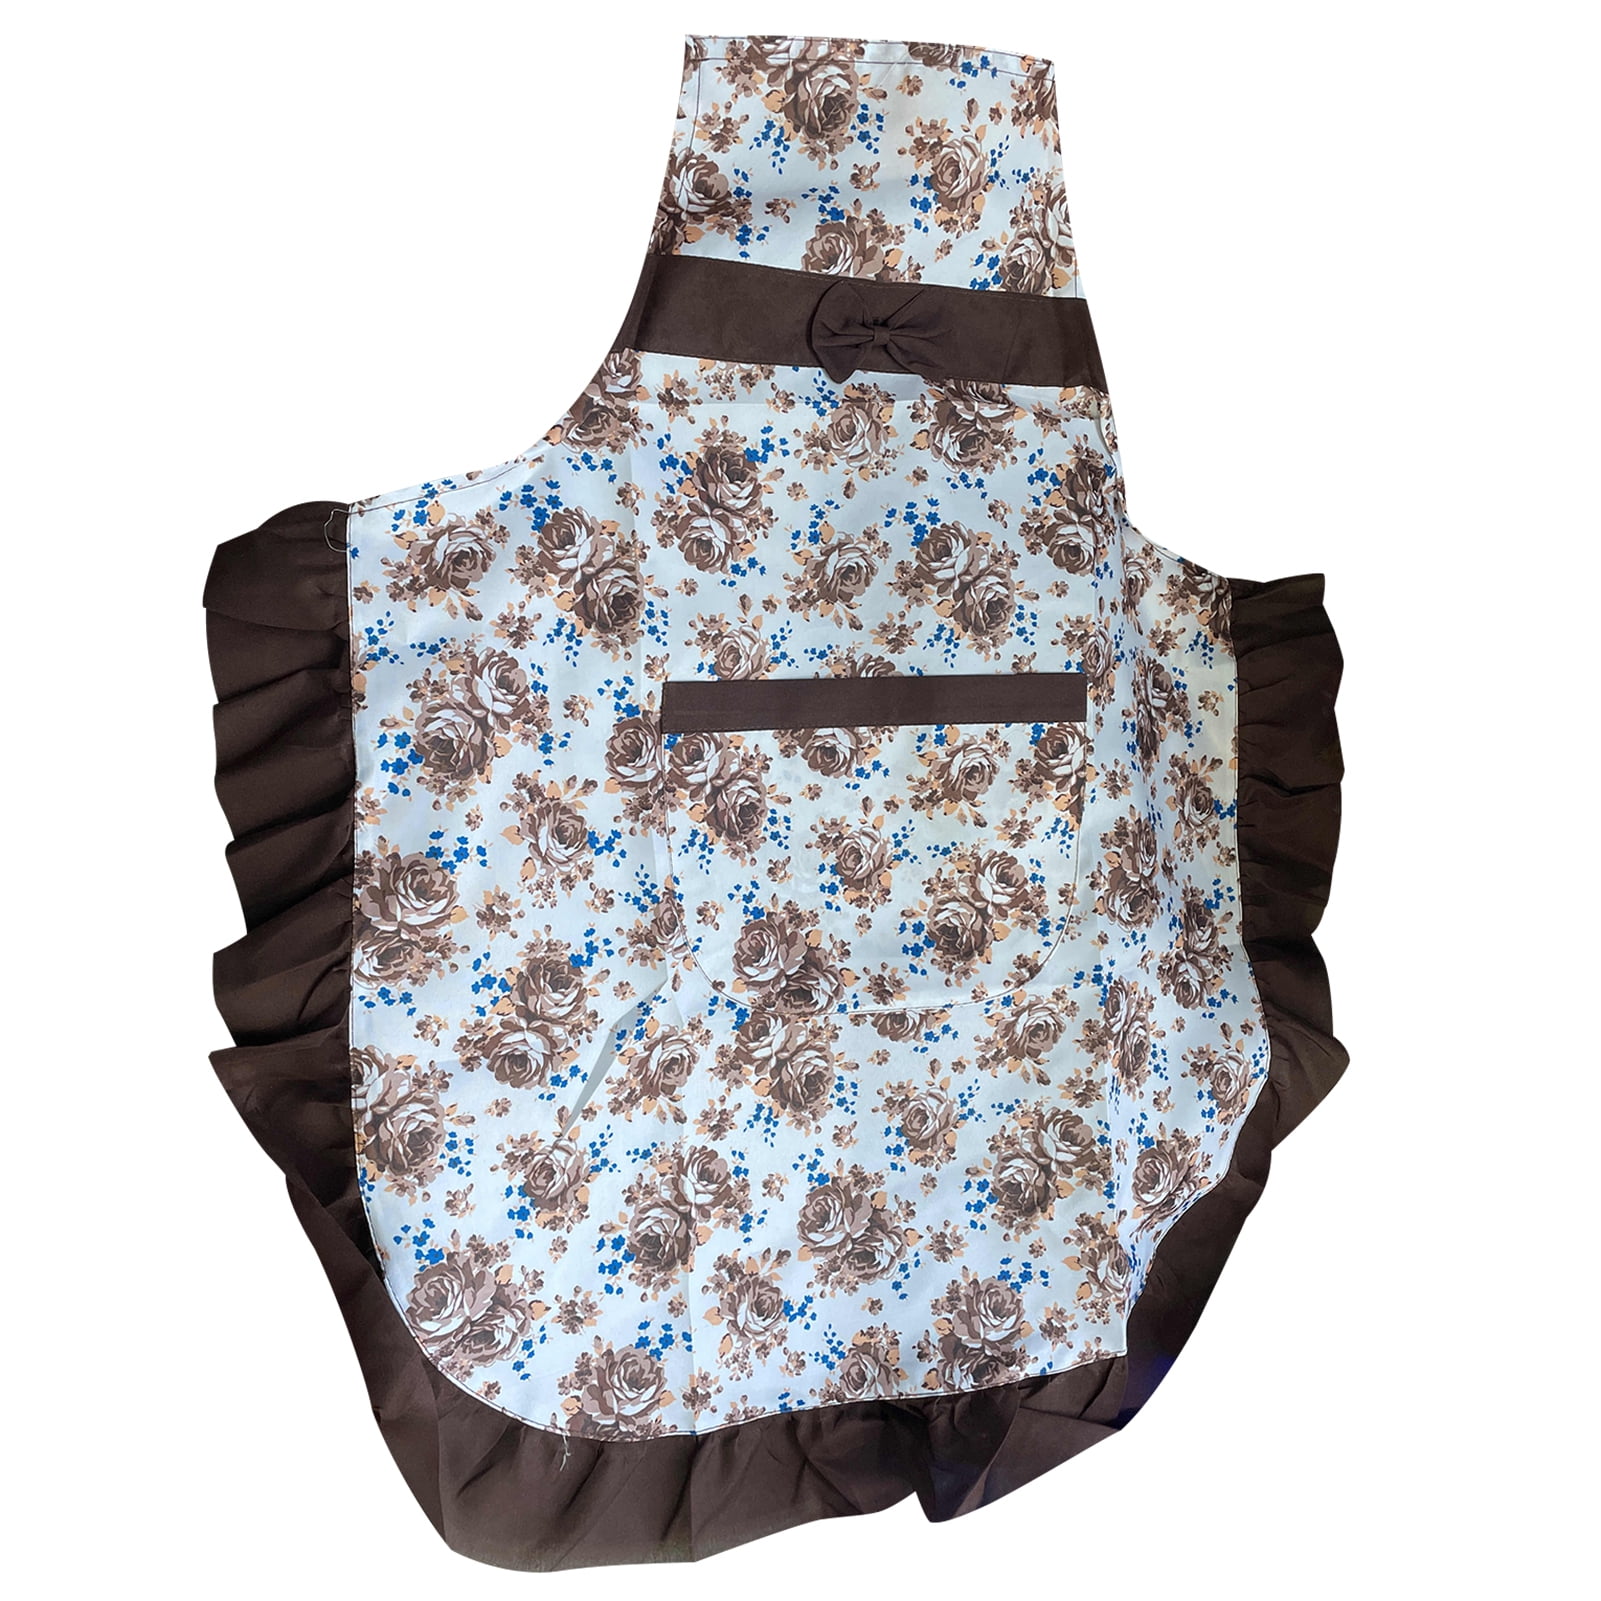 Kitchen Floral Apron Gift for Mother's Day - Personalized Mom Aprons Gifts  w/Pockets w/Name for Mother Men for Grilling Cooking BBQ Baking Customized